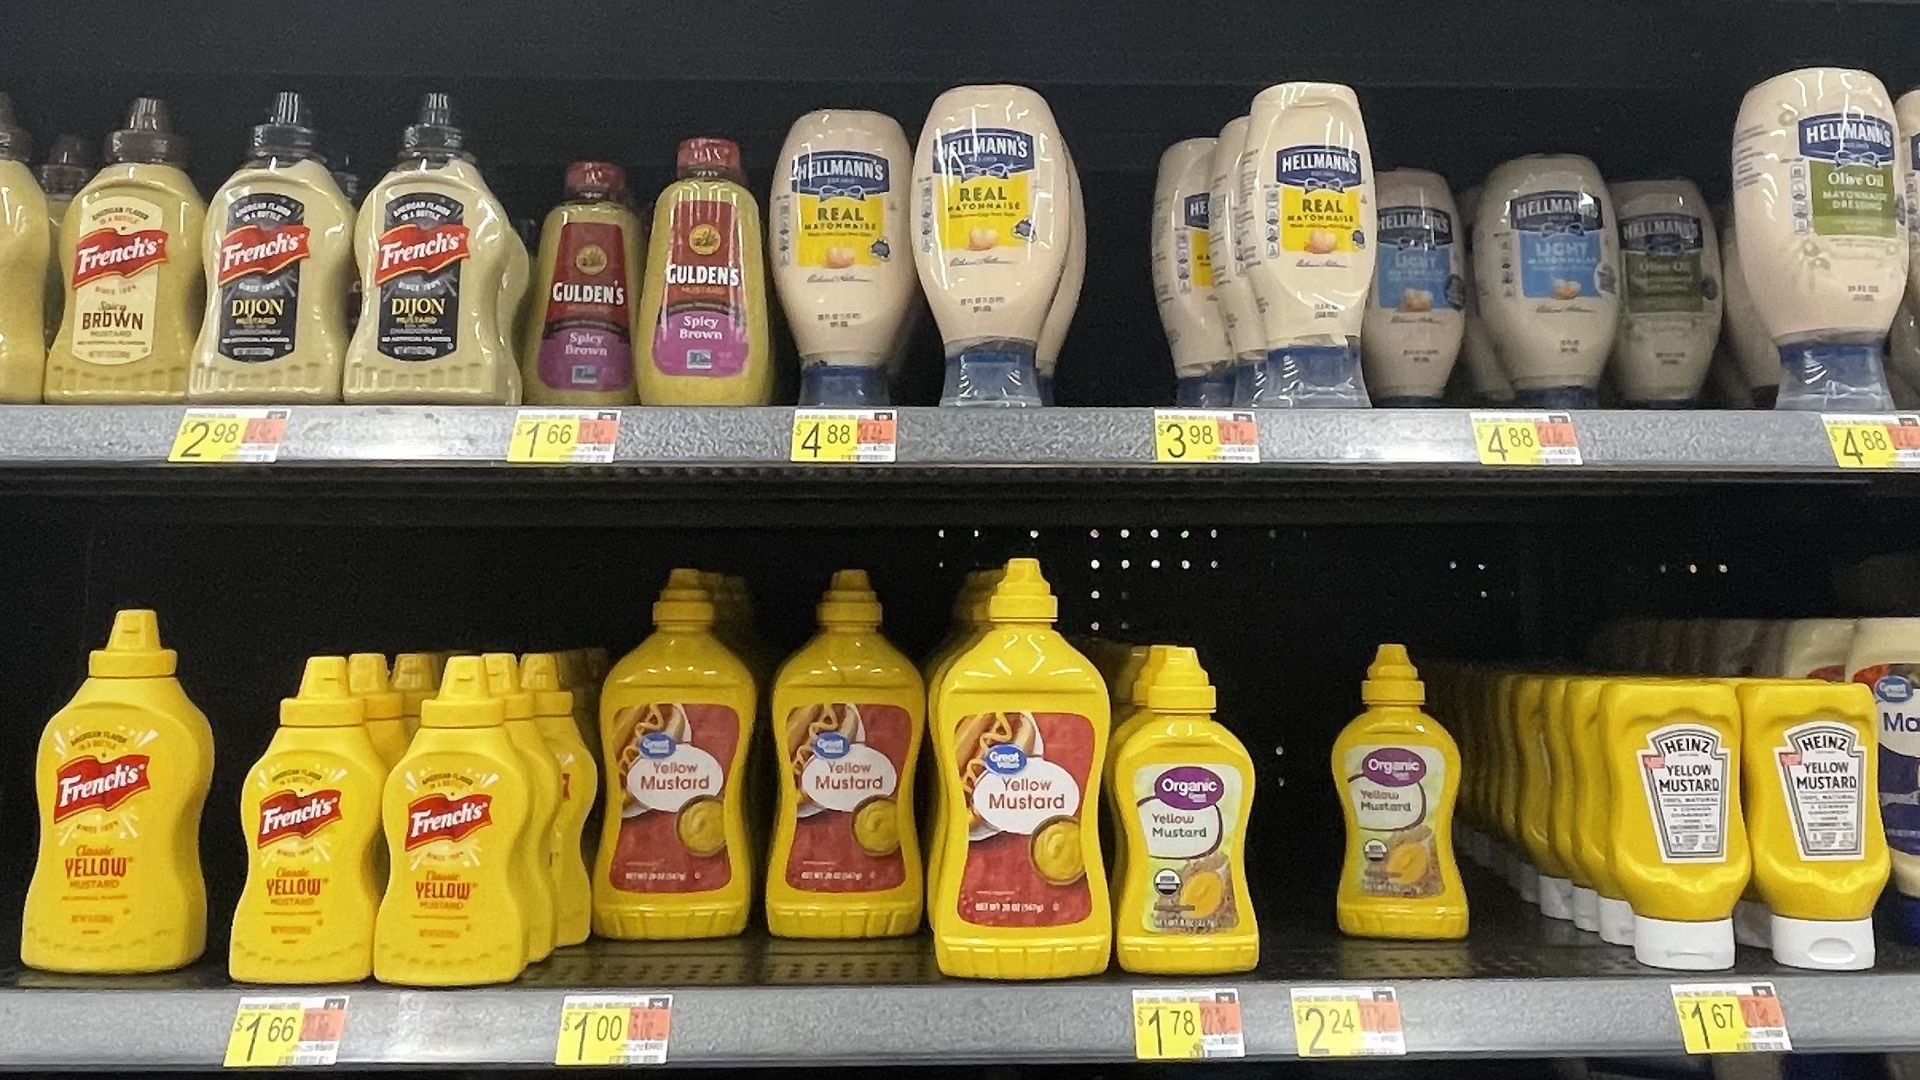 Mustard shortage? Kraft Heinz and French's don't expect U.S. consumers